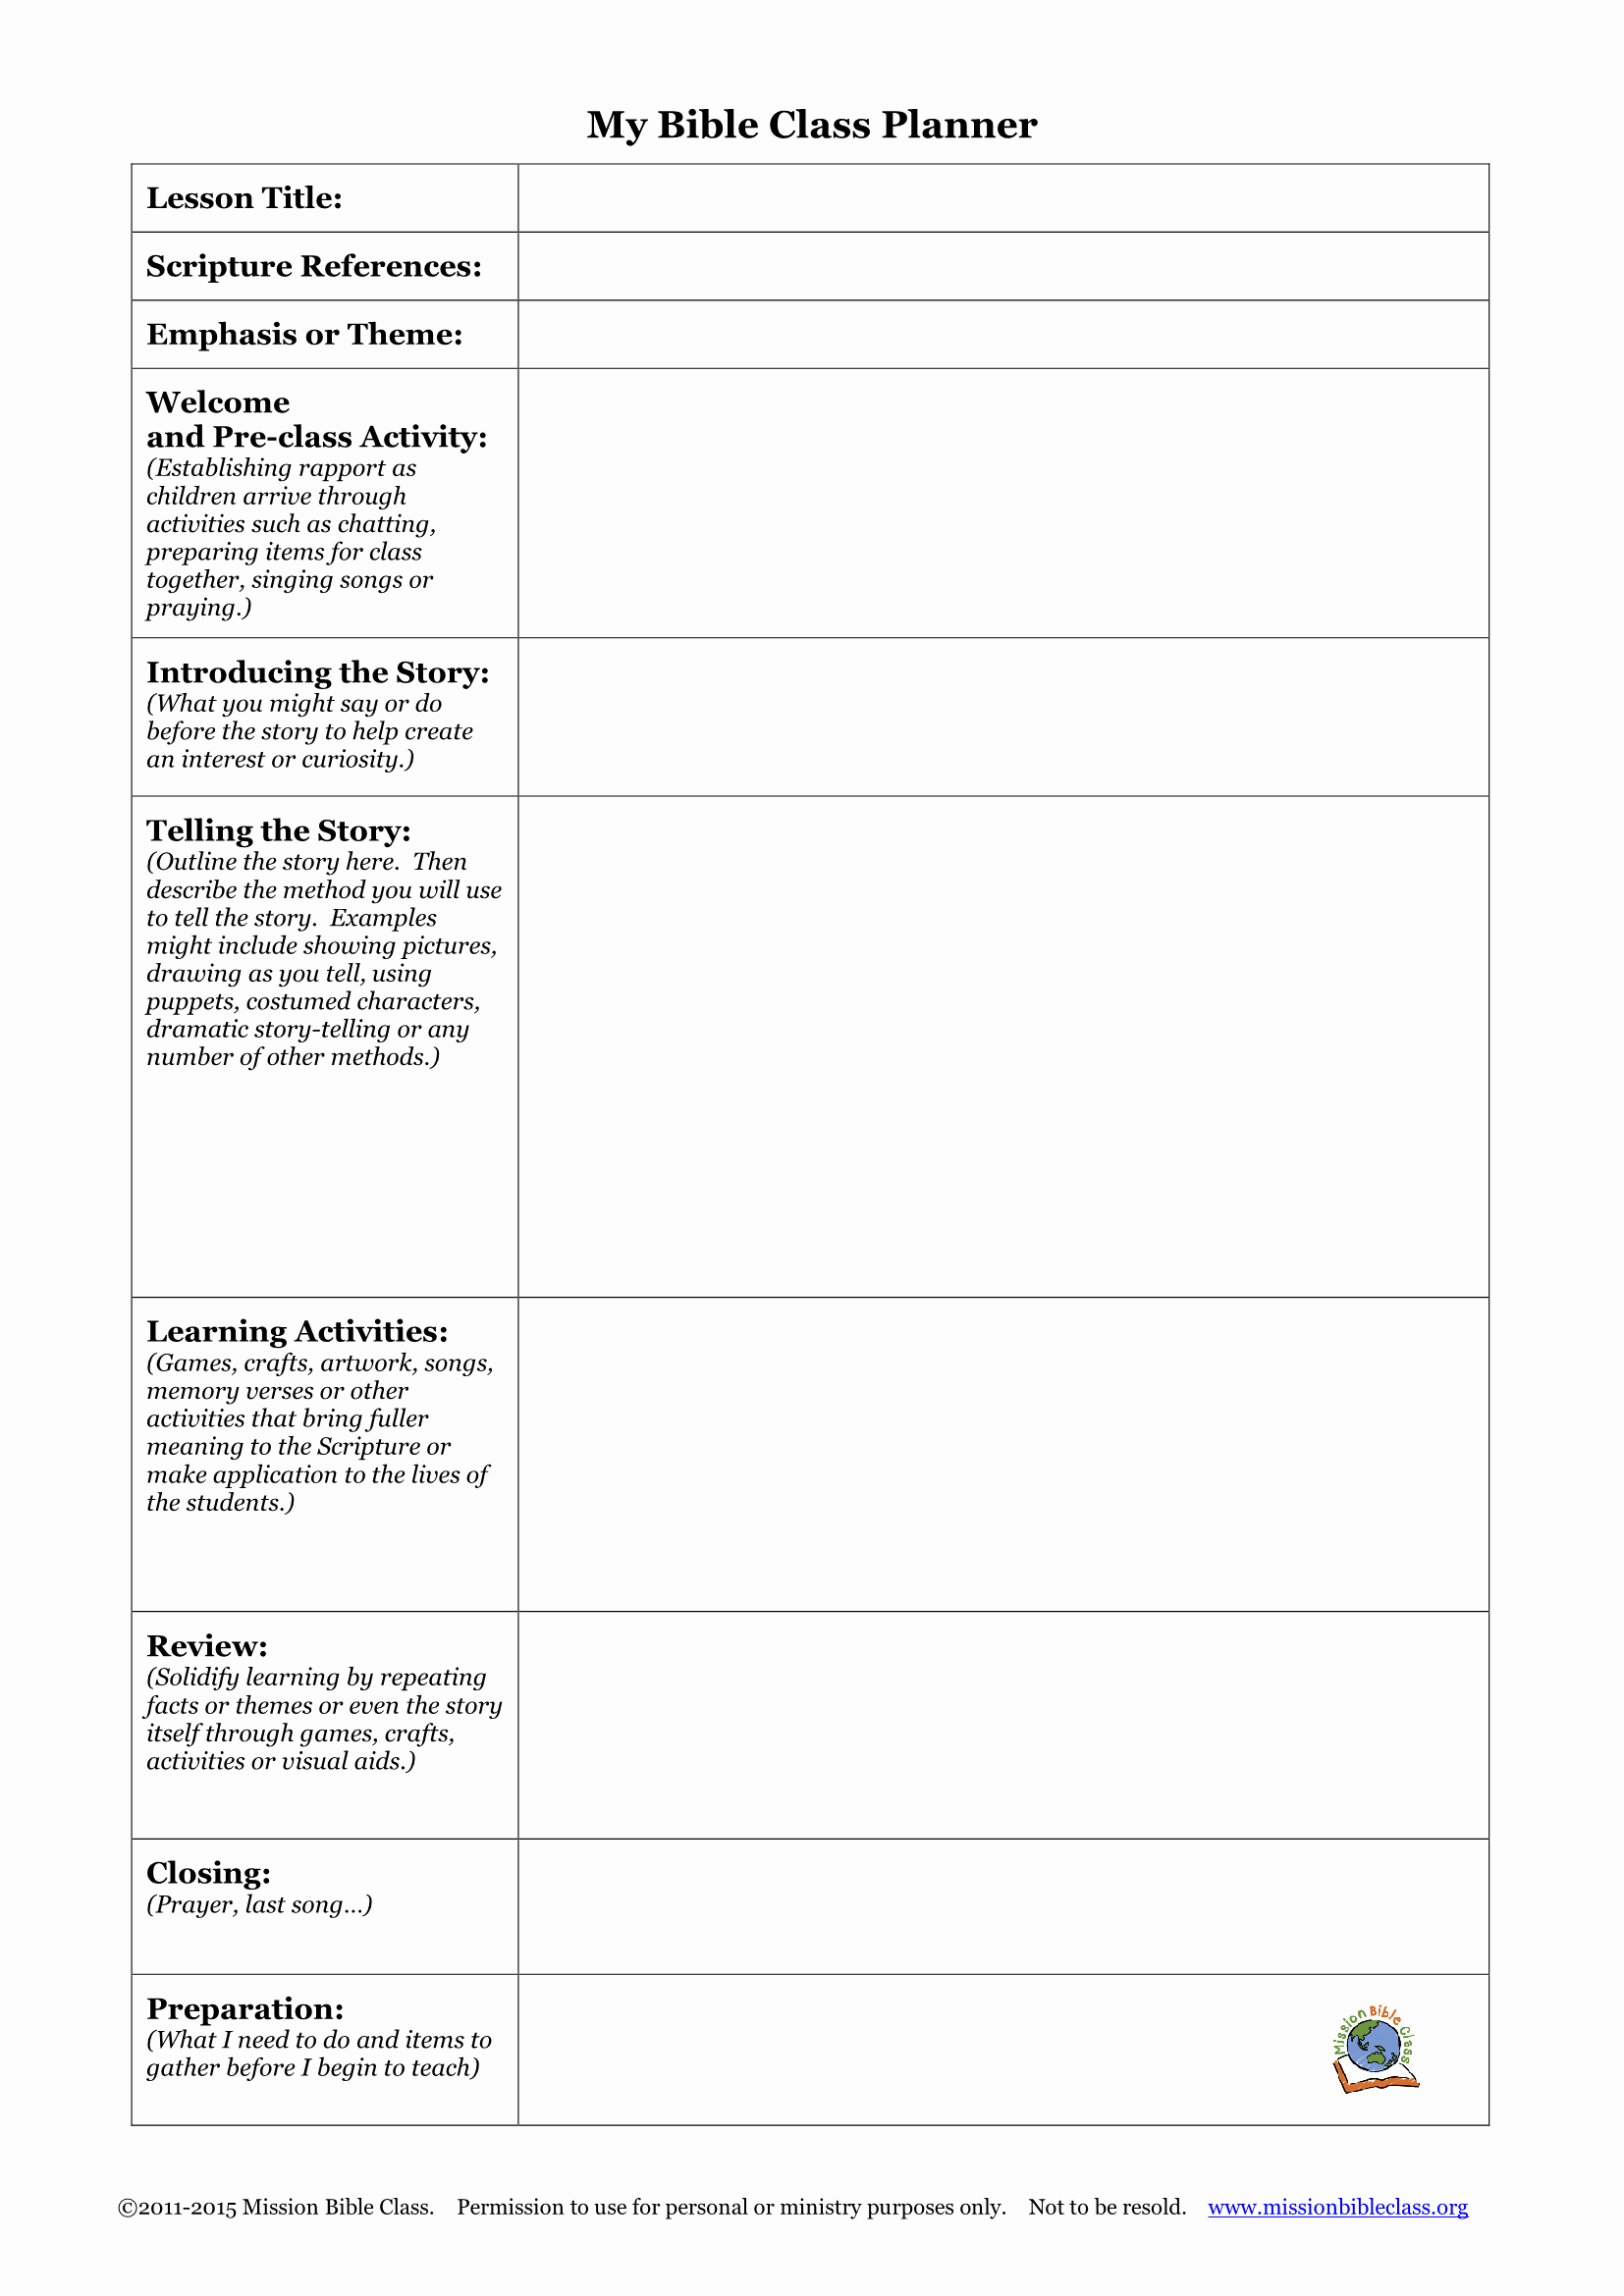 Lesson Plan Template Word Editable Beautiful English Lesson Plan Templates – Mission Bible Class